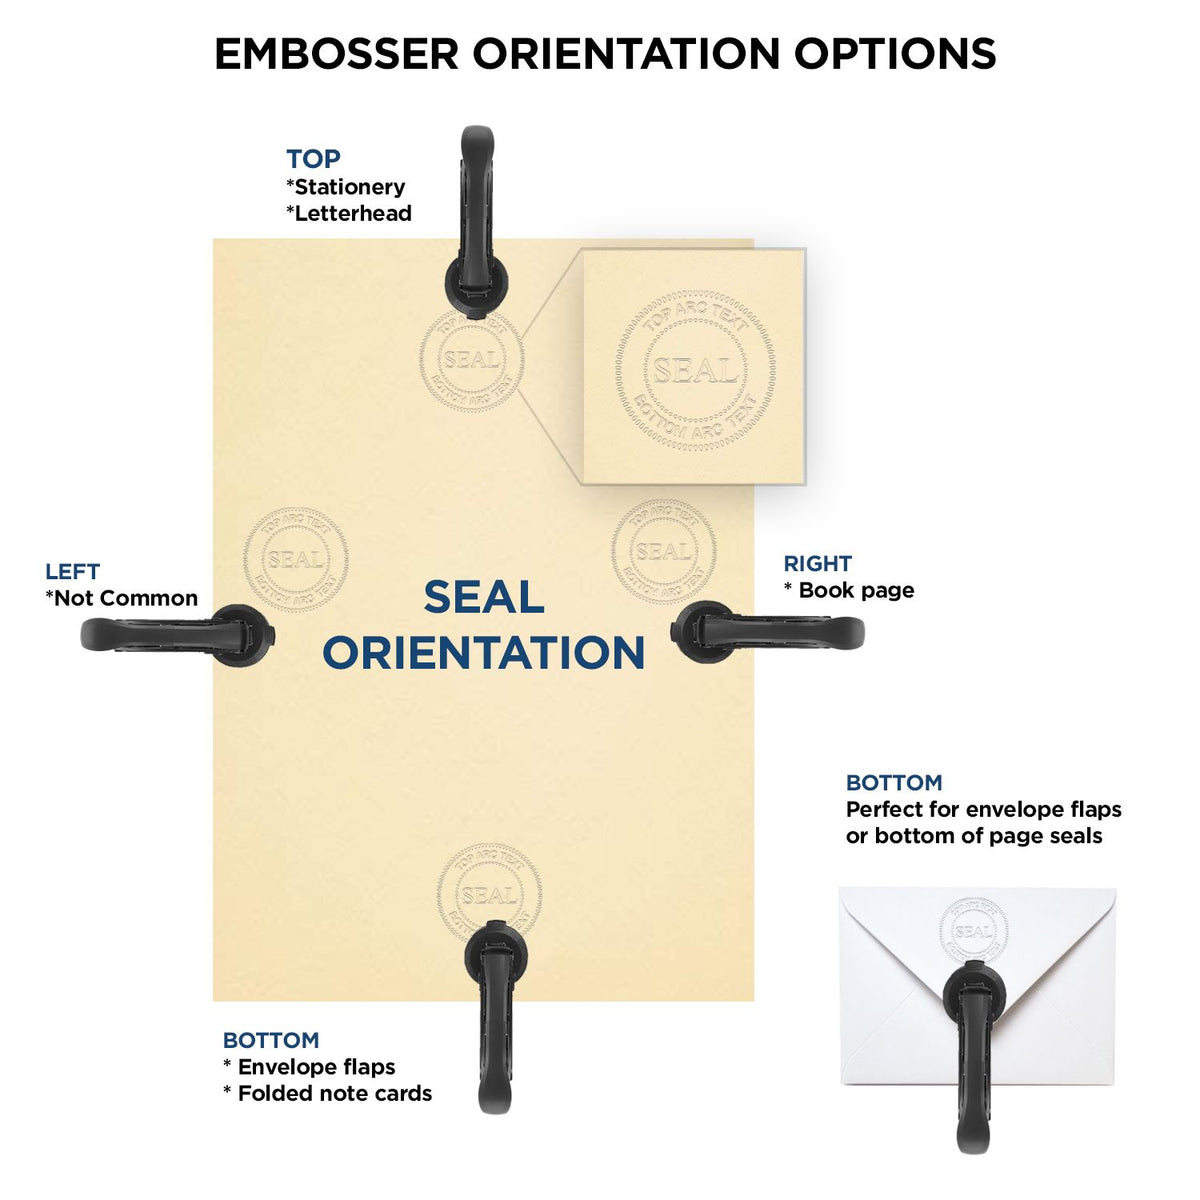 An infographic for the Handheld Michigan Professional Engineer Embosser showing embosser orientation, this is showing examples of a top, bottom, right and left insert.